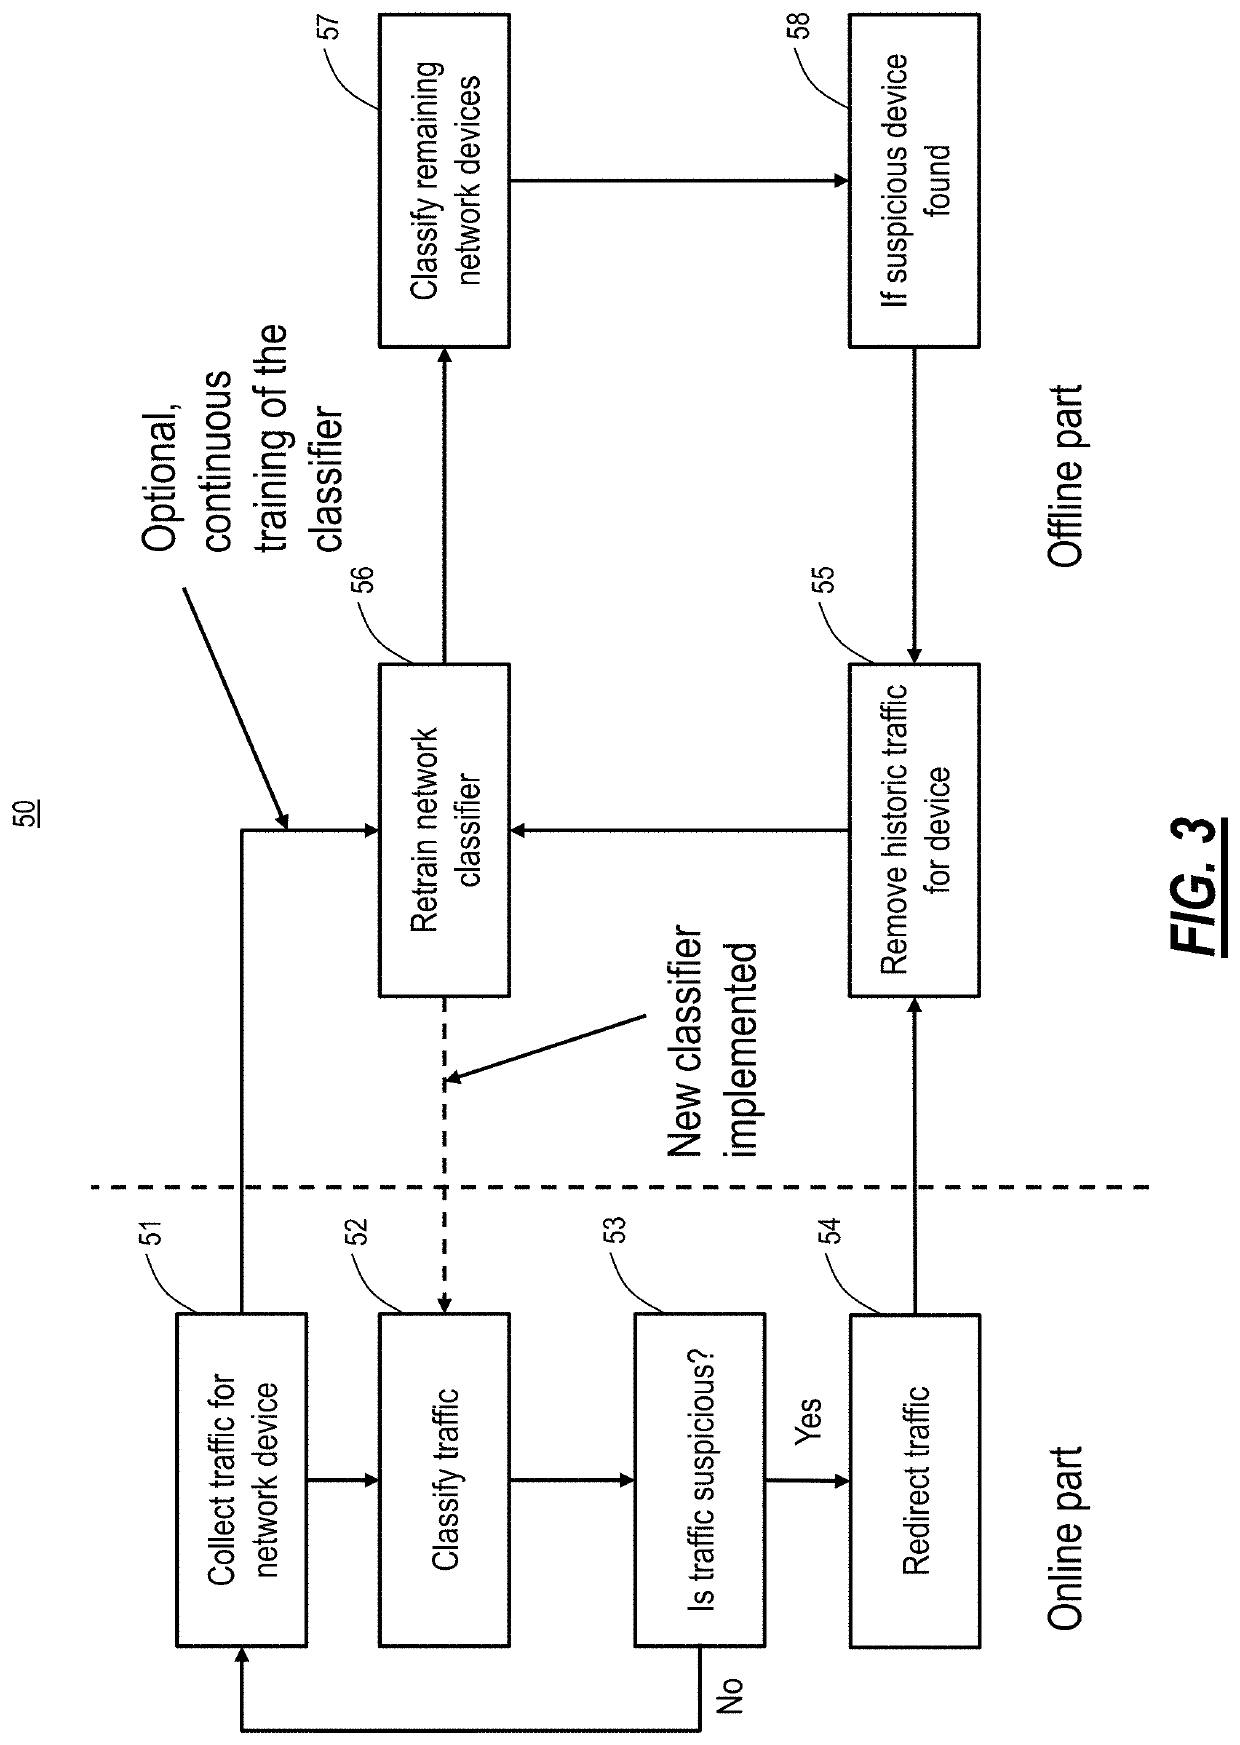 Network architecture providing device identification and redirection using whitelisting traffic classification